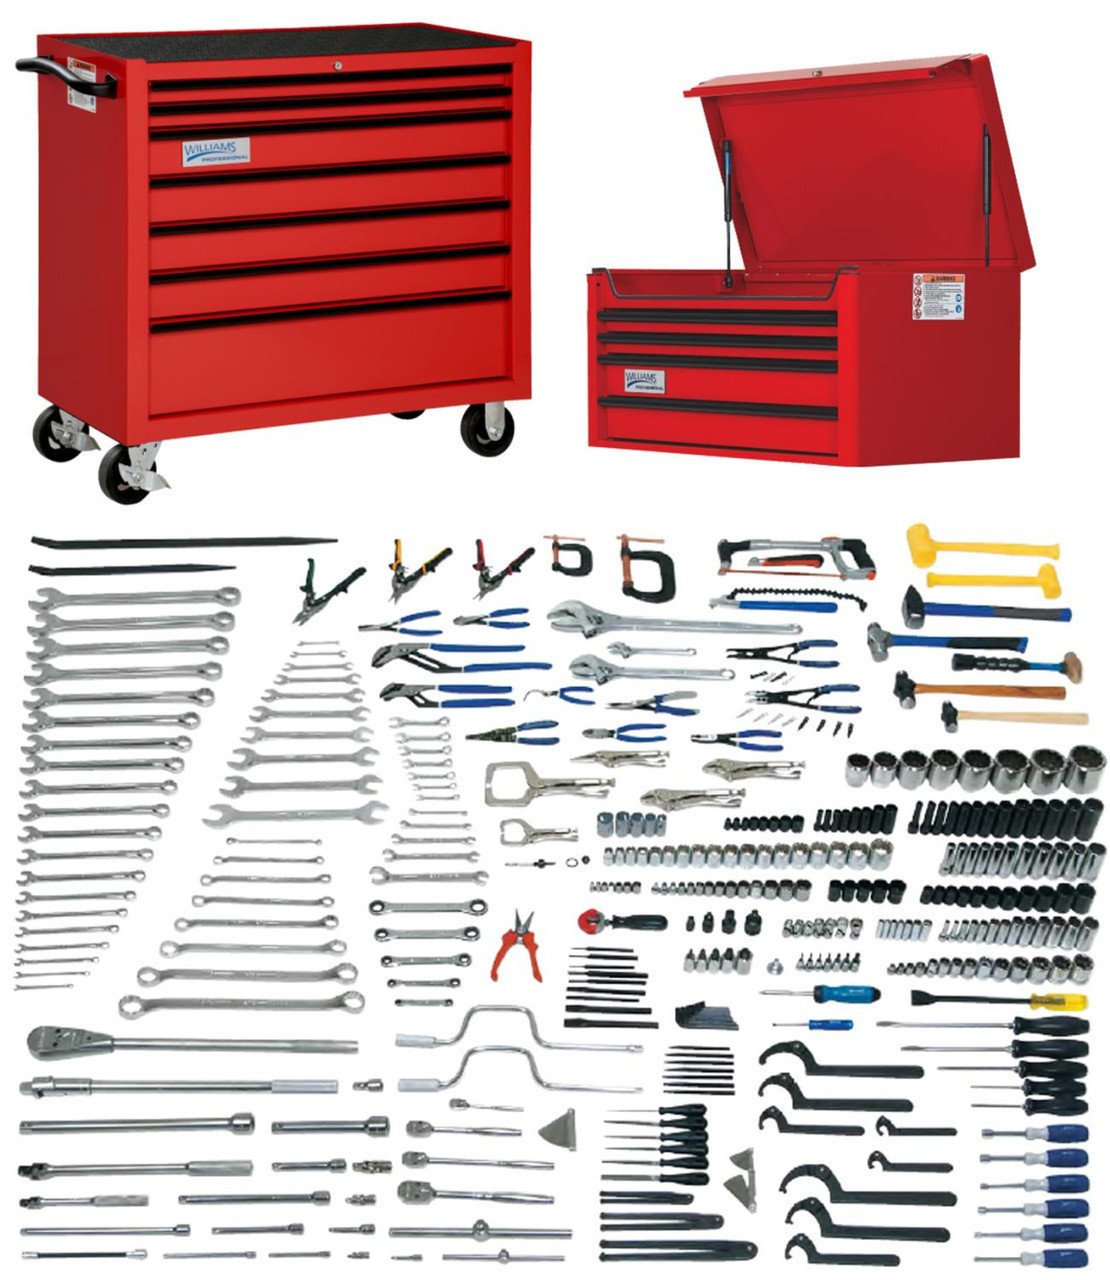 Williams Complete Master Maintenance Tool Set with Boxes - JHWMASTERTB